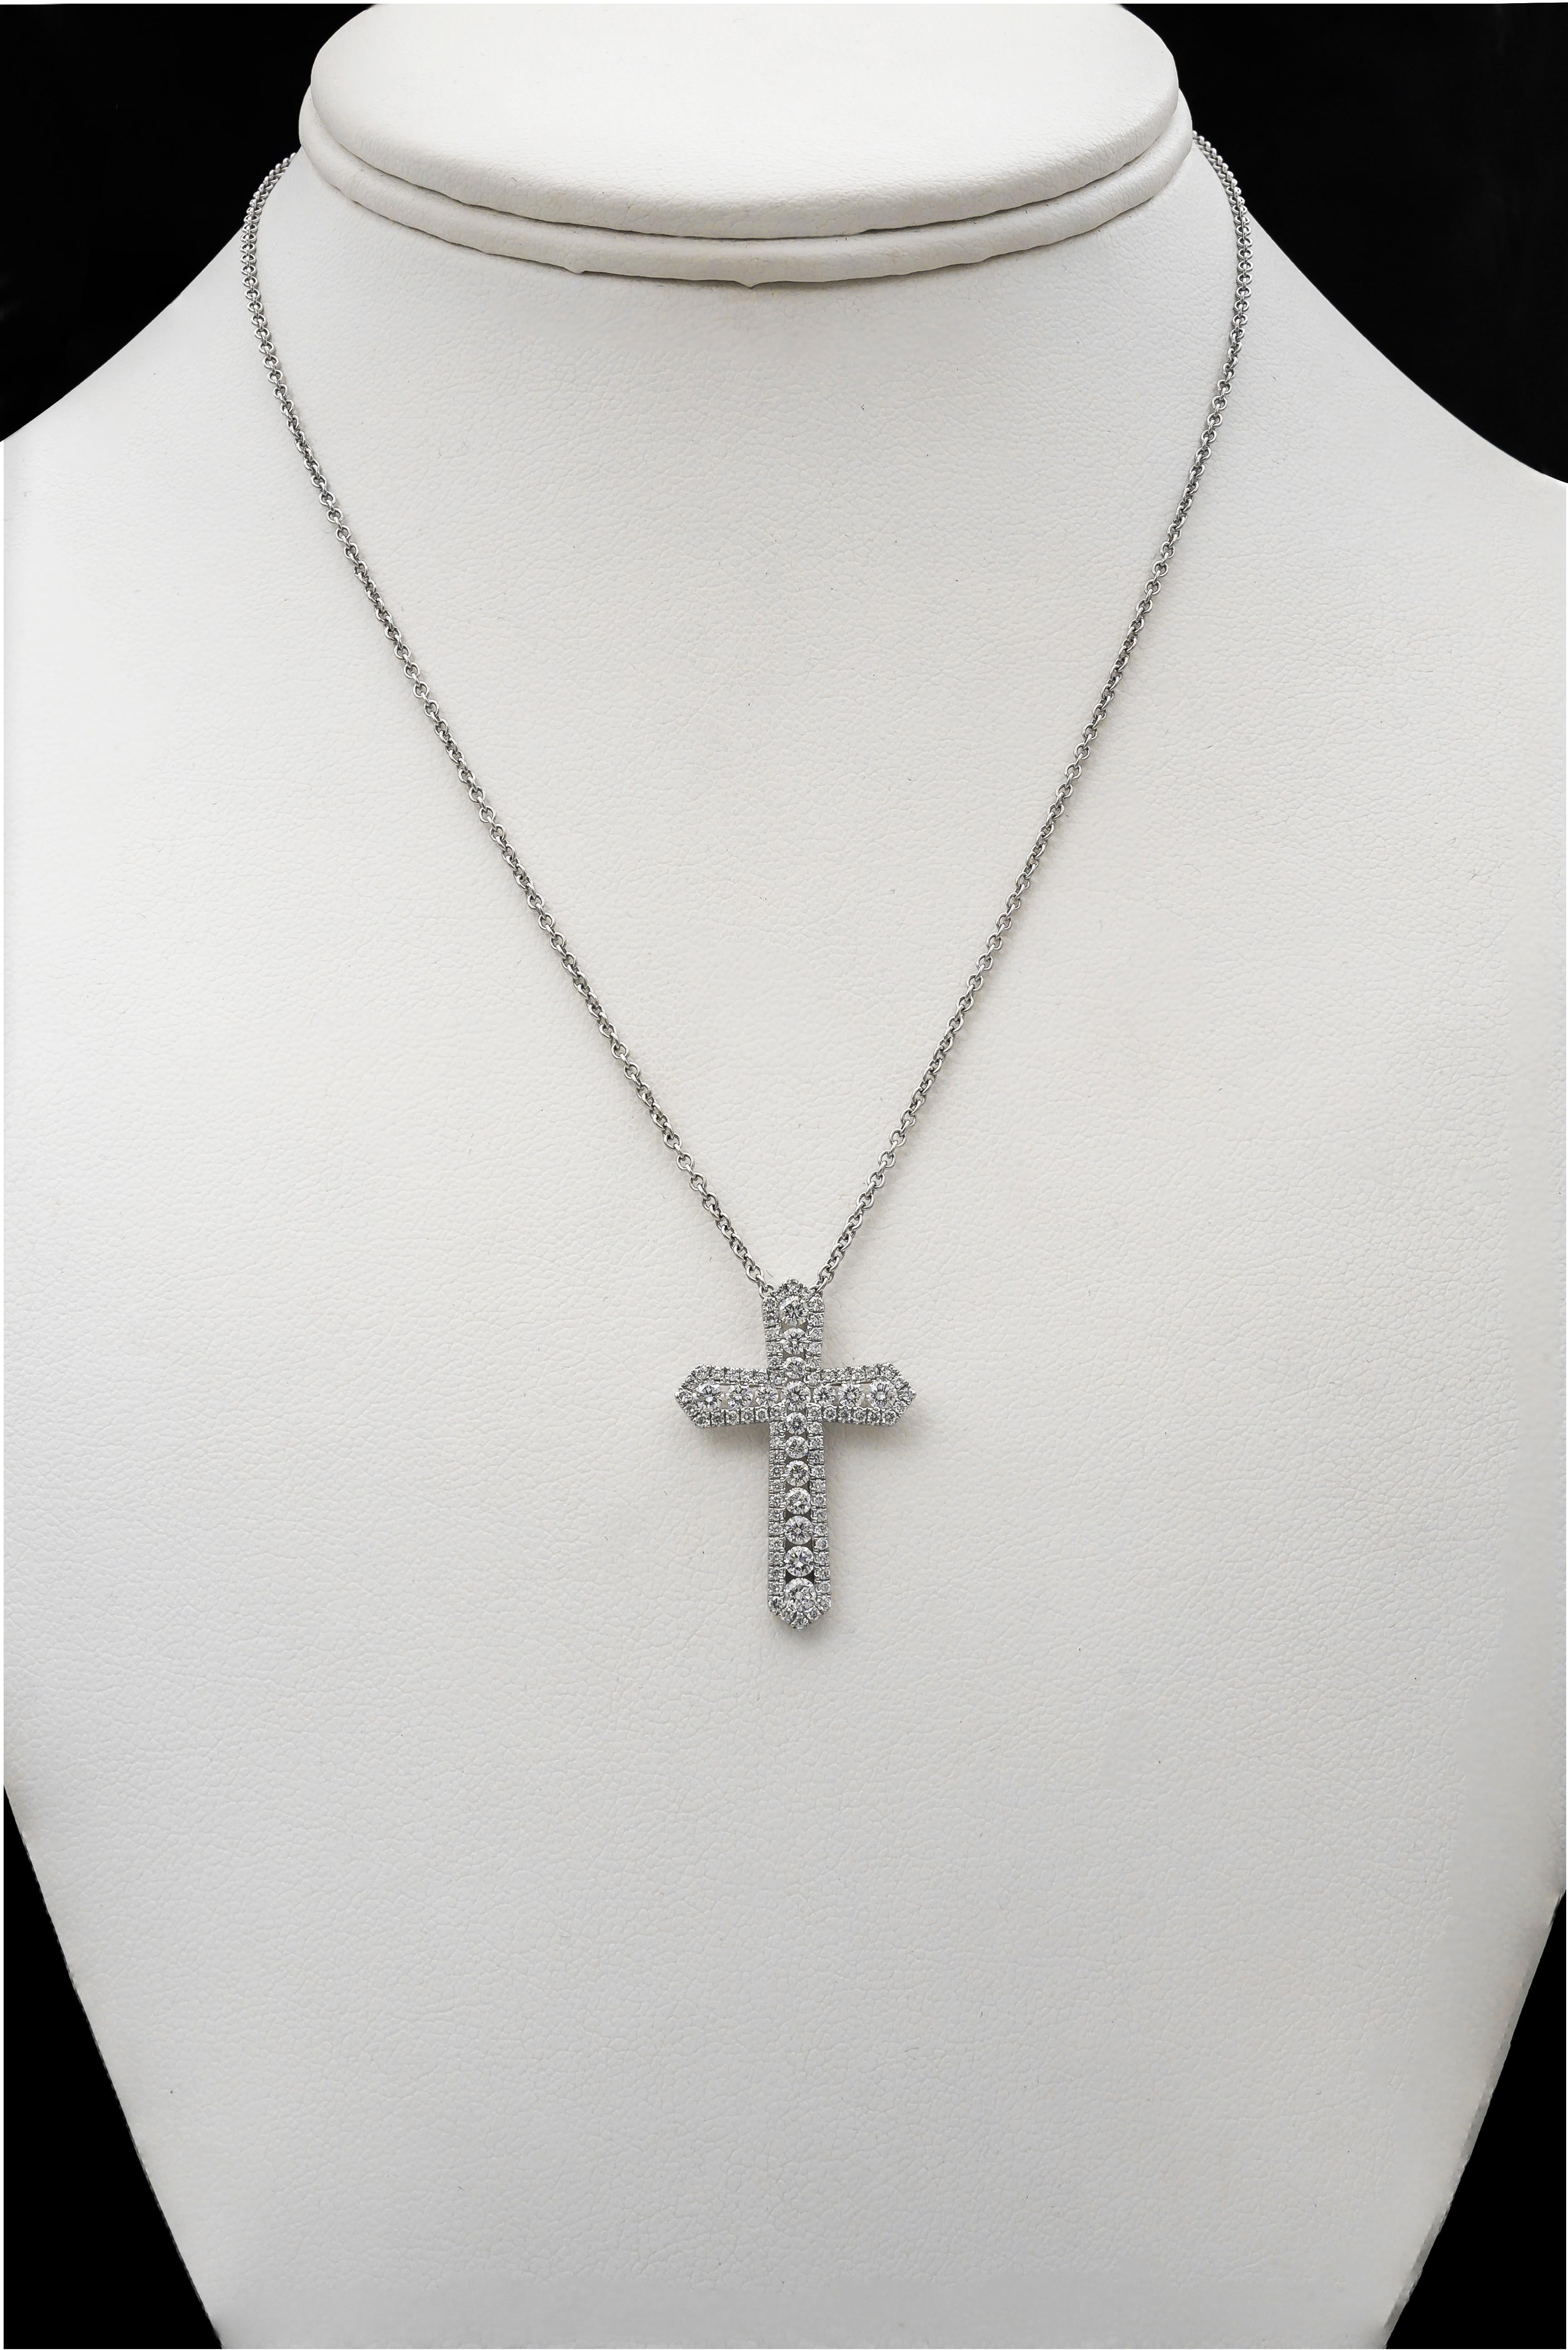 This is an incredibly dazzling cross pendant because of the minimal visibility of the gold composition. Showcases 17 sparkling round diamonds channel set in 18 karat white gold. The channel walls holding the diamonds are encrusted with round melee